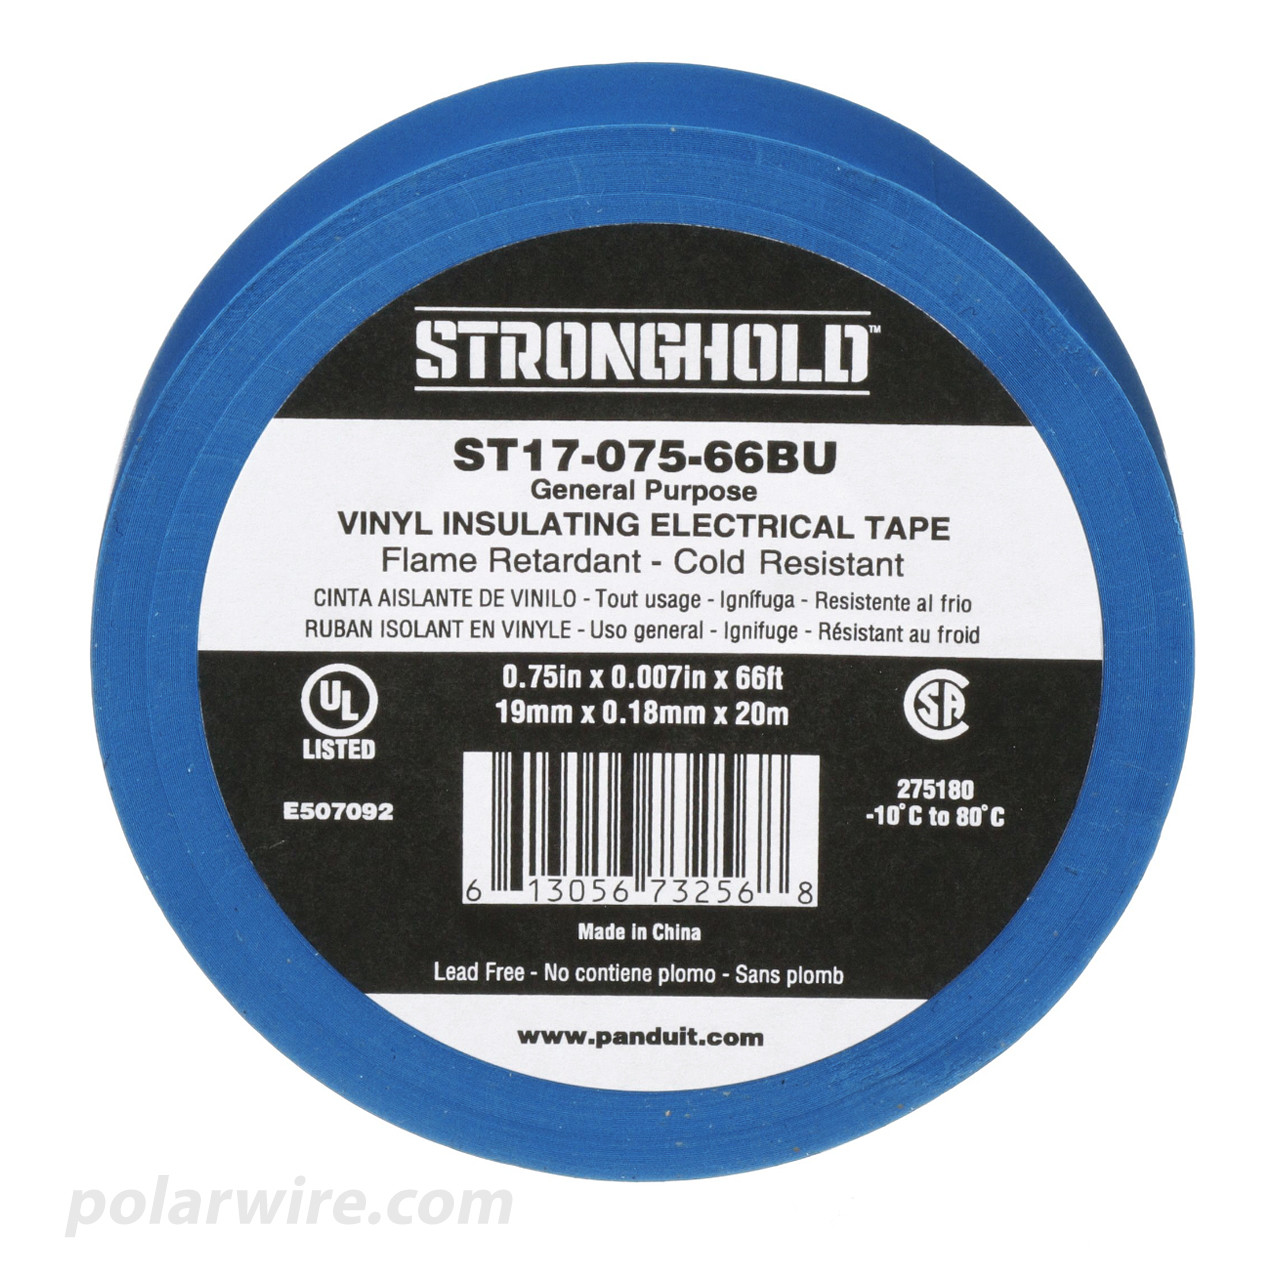 3/4 inch Blue PVC Vinyl Electrical Tape Panduit Stronghold